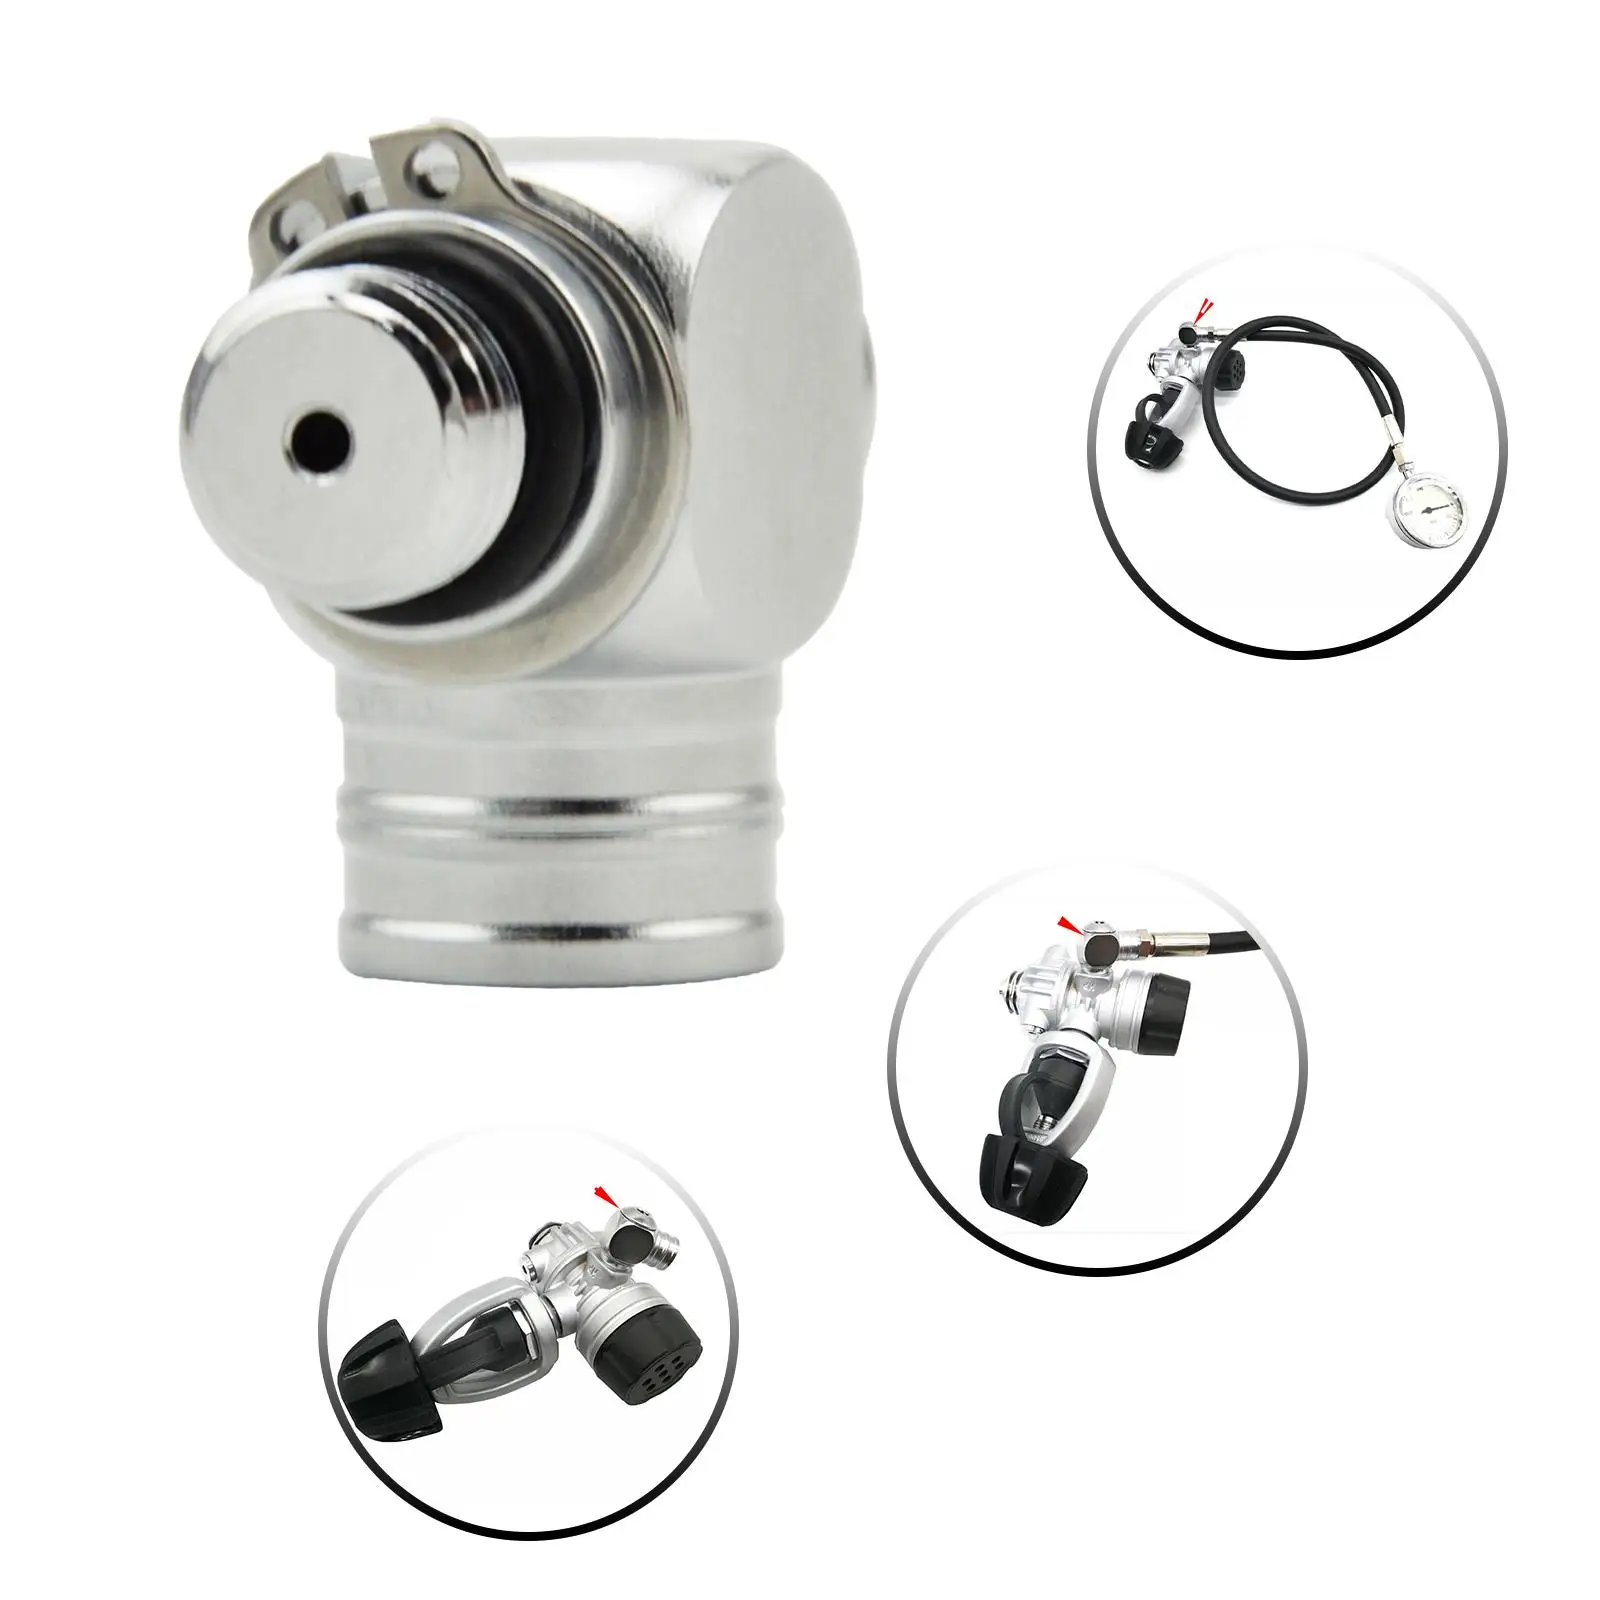 Scuba Diving Dive Regulator Adapter 360 Degree Rotatable First Stage Connection Adapter